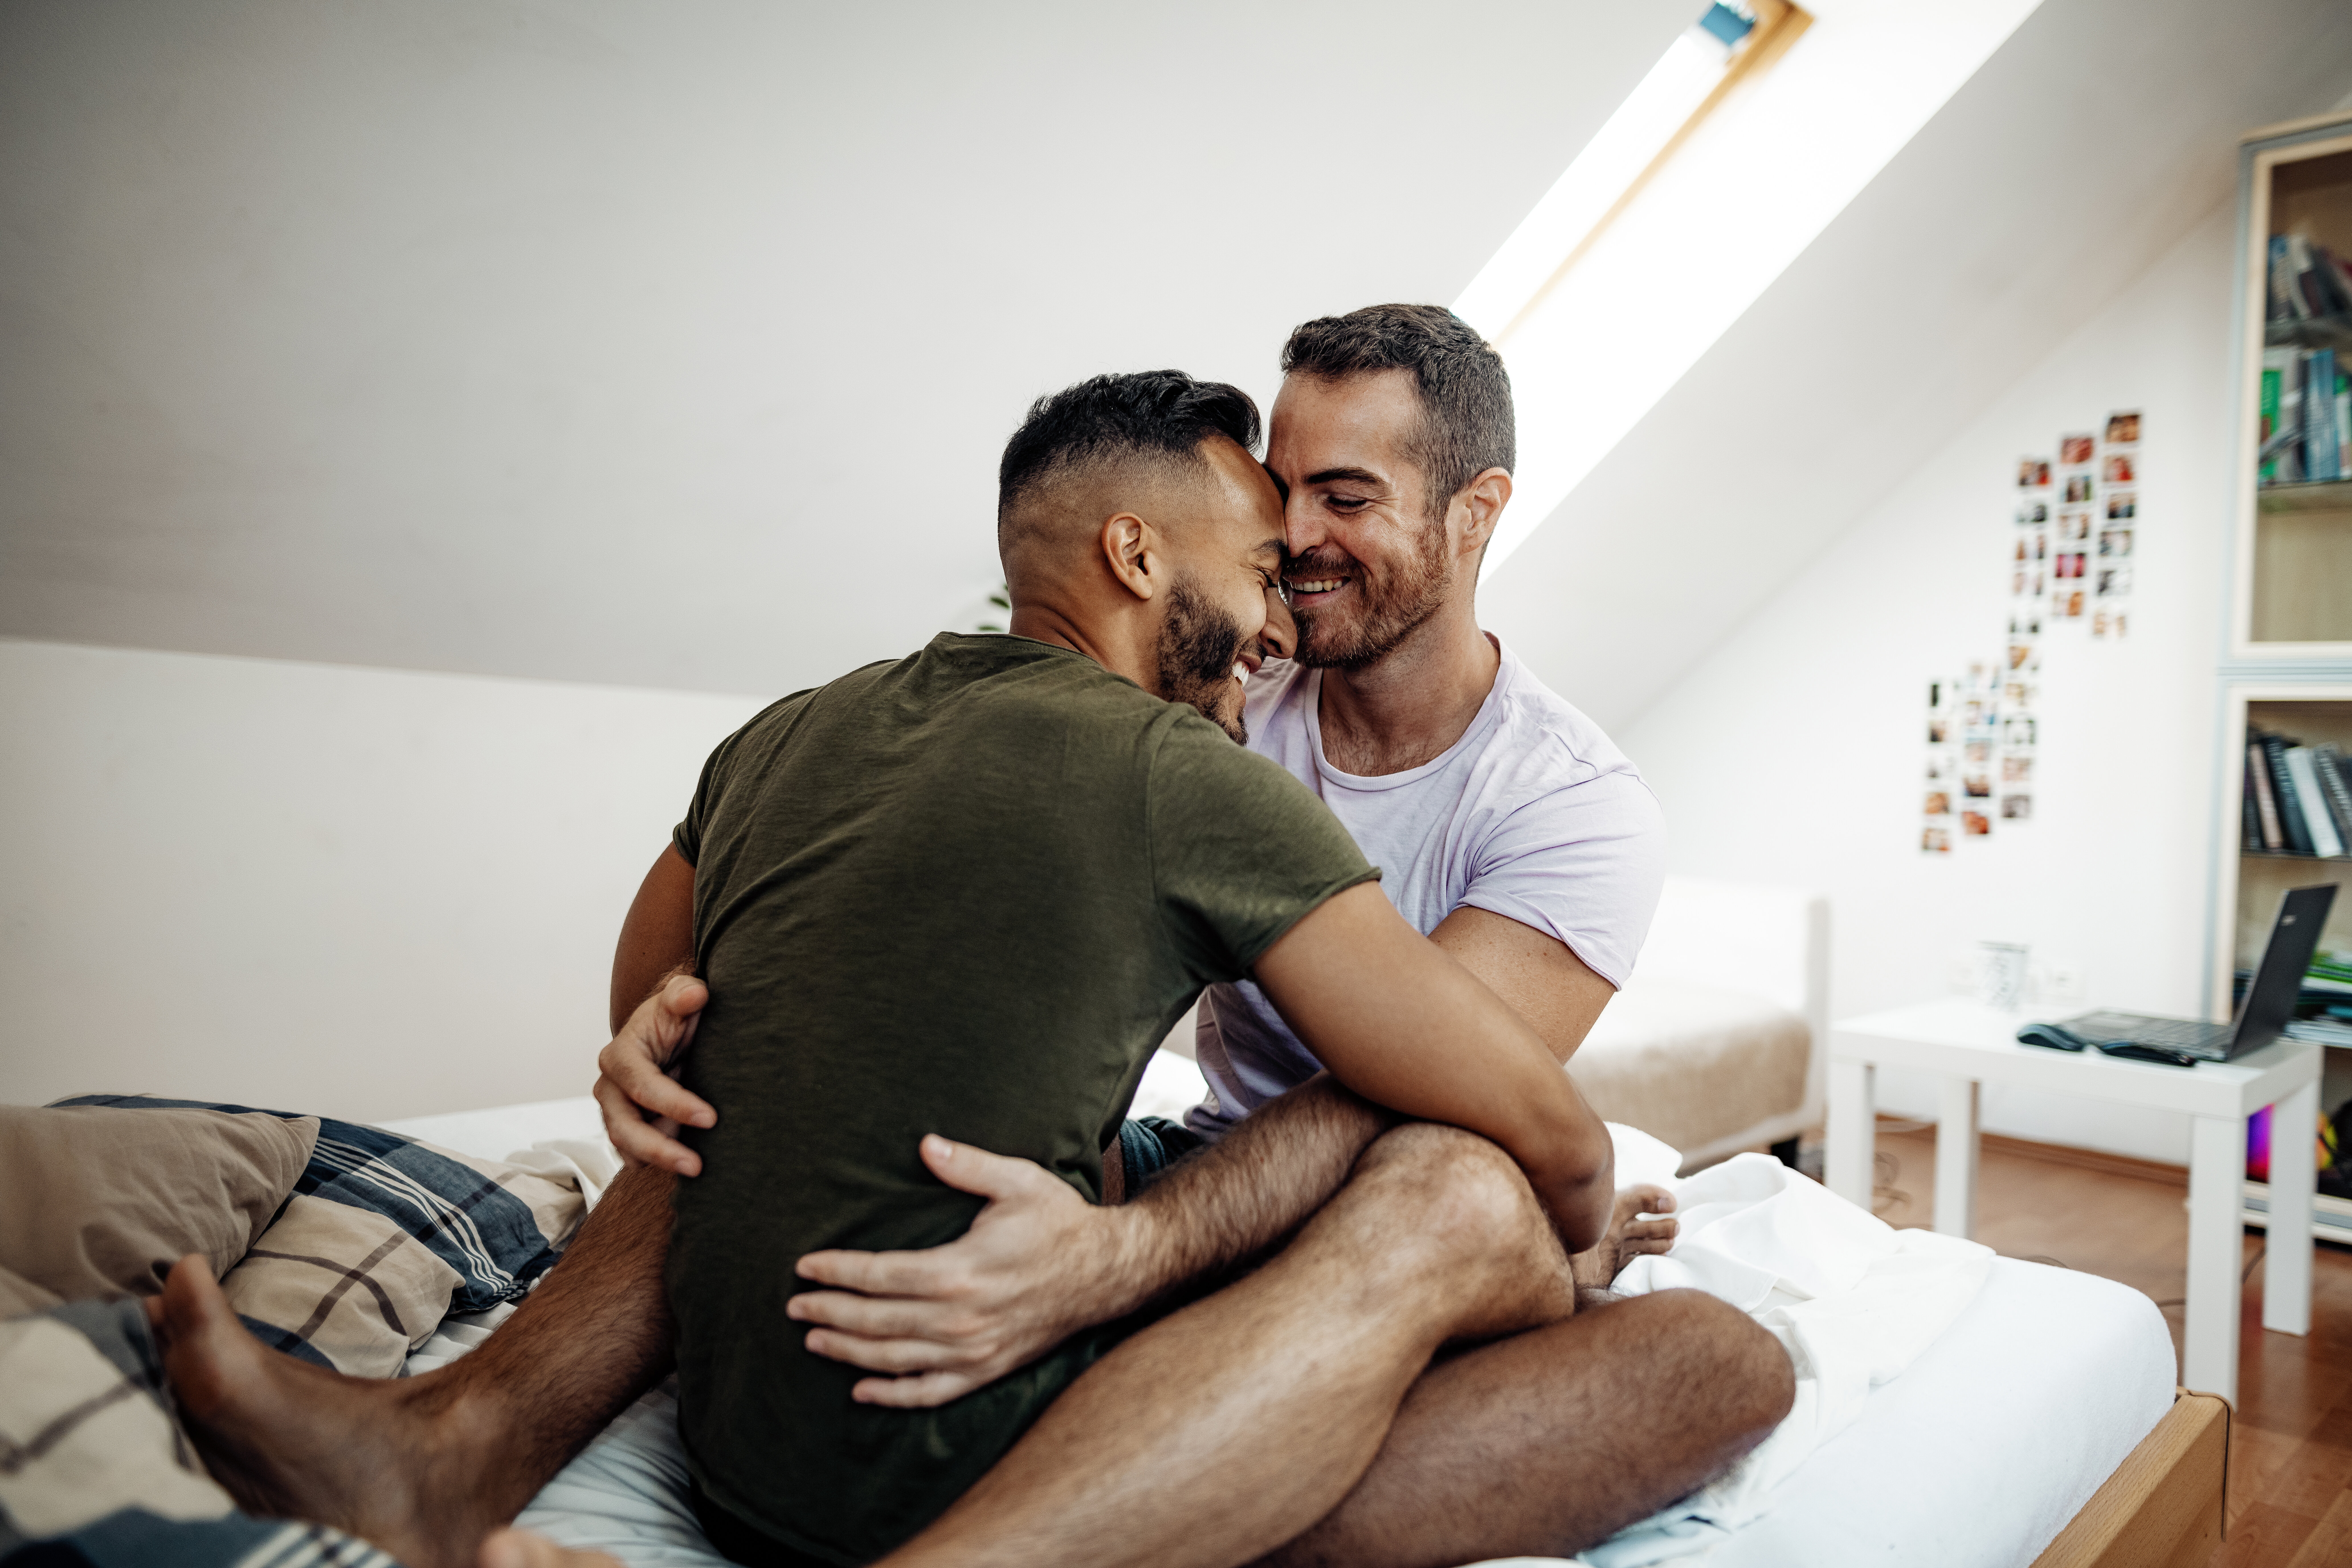 Two men embracing and smiling on a bed in a cozy room setting